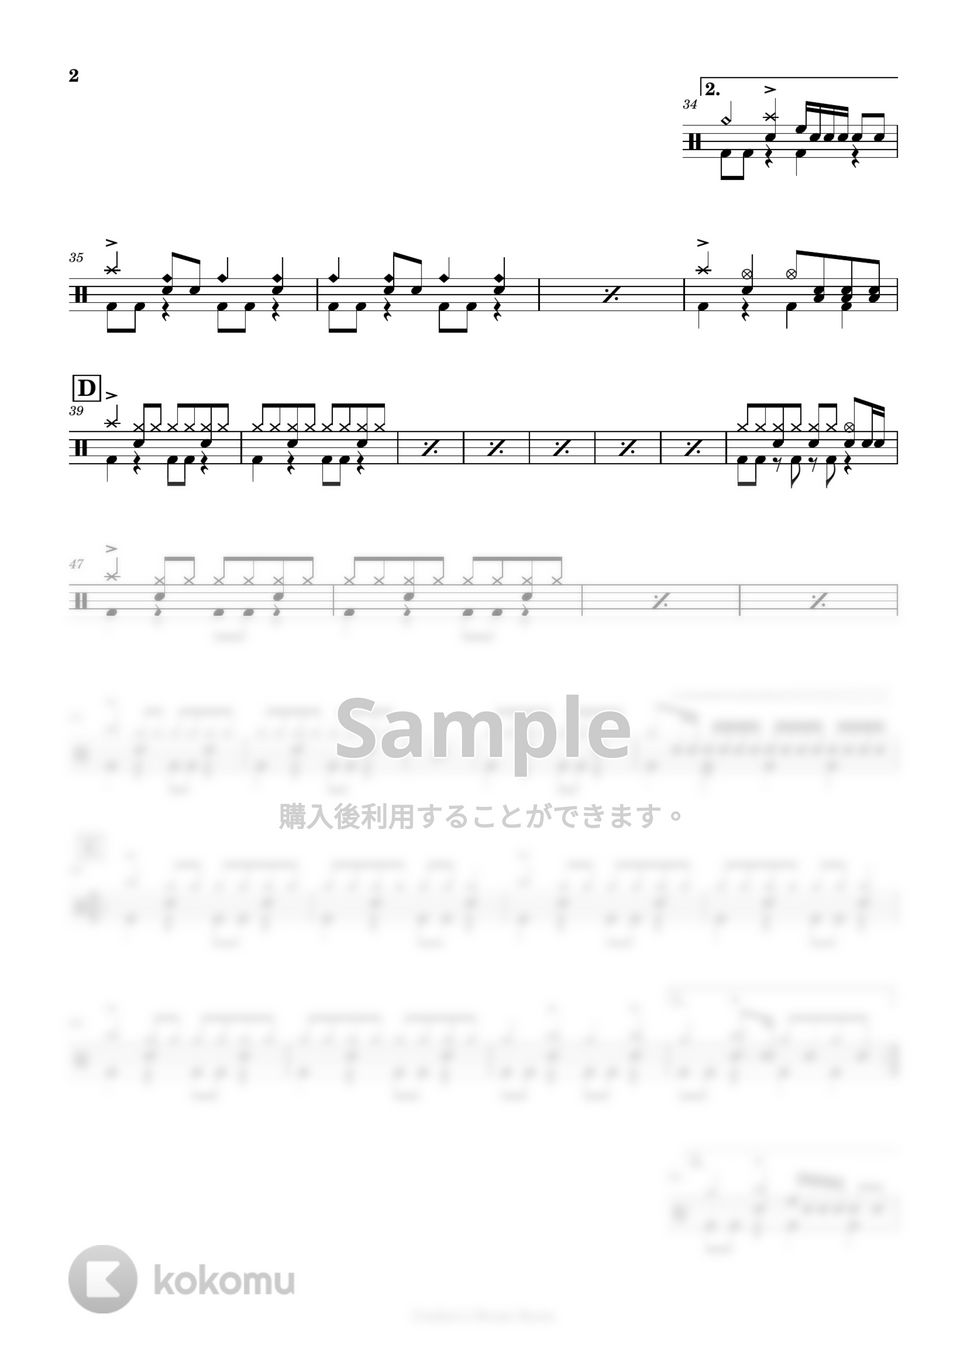 Hump Back - 番狂わせ by Cookie's Drum Score